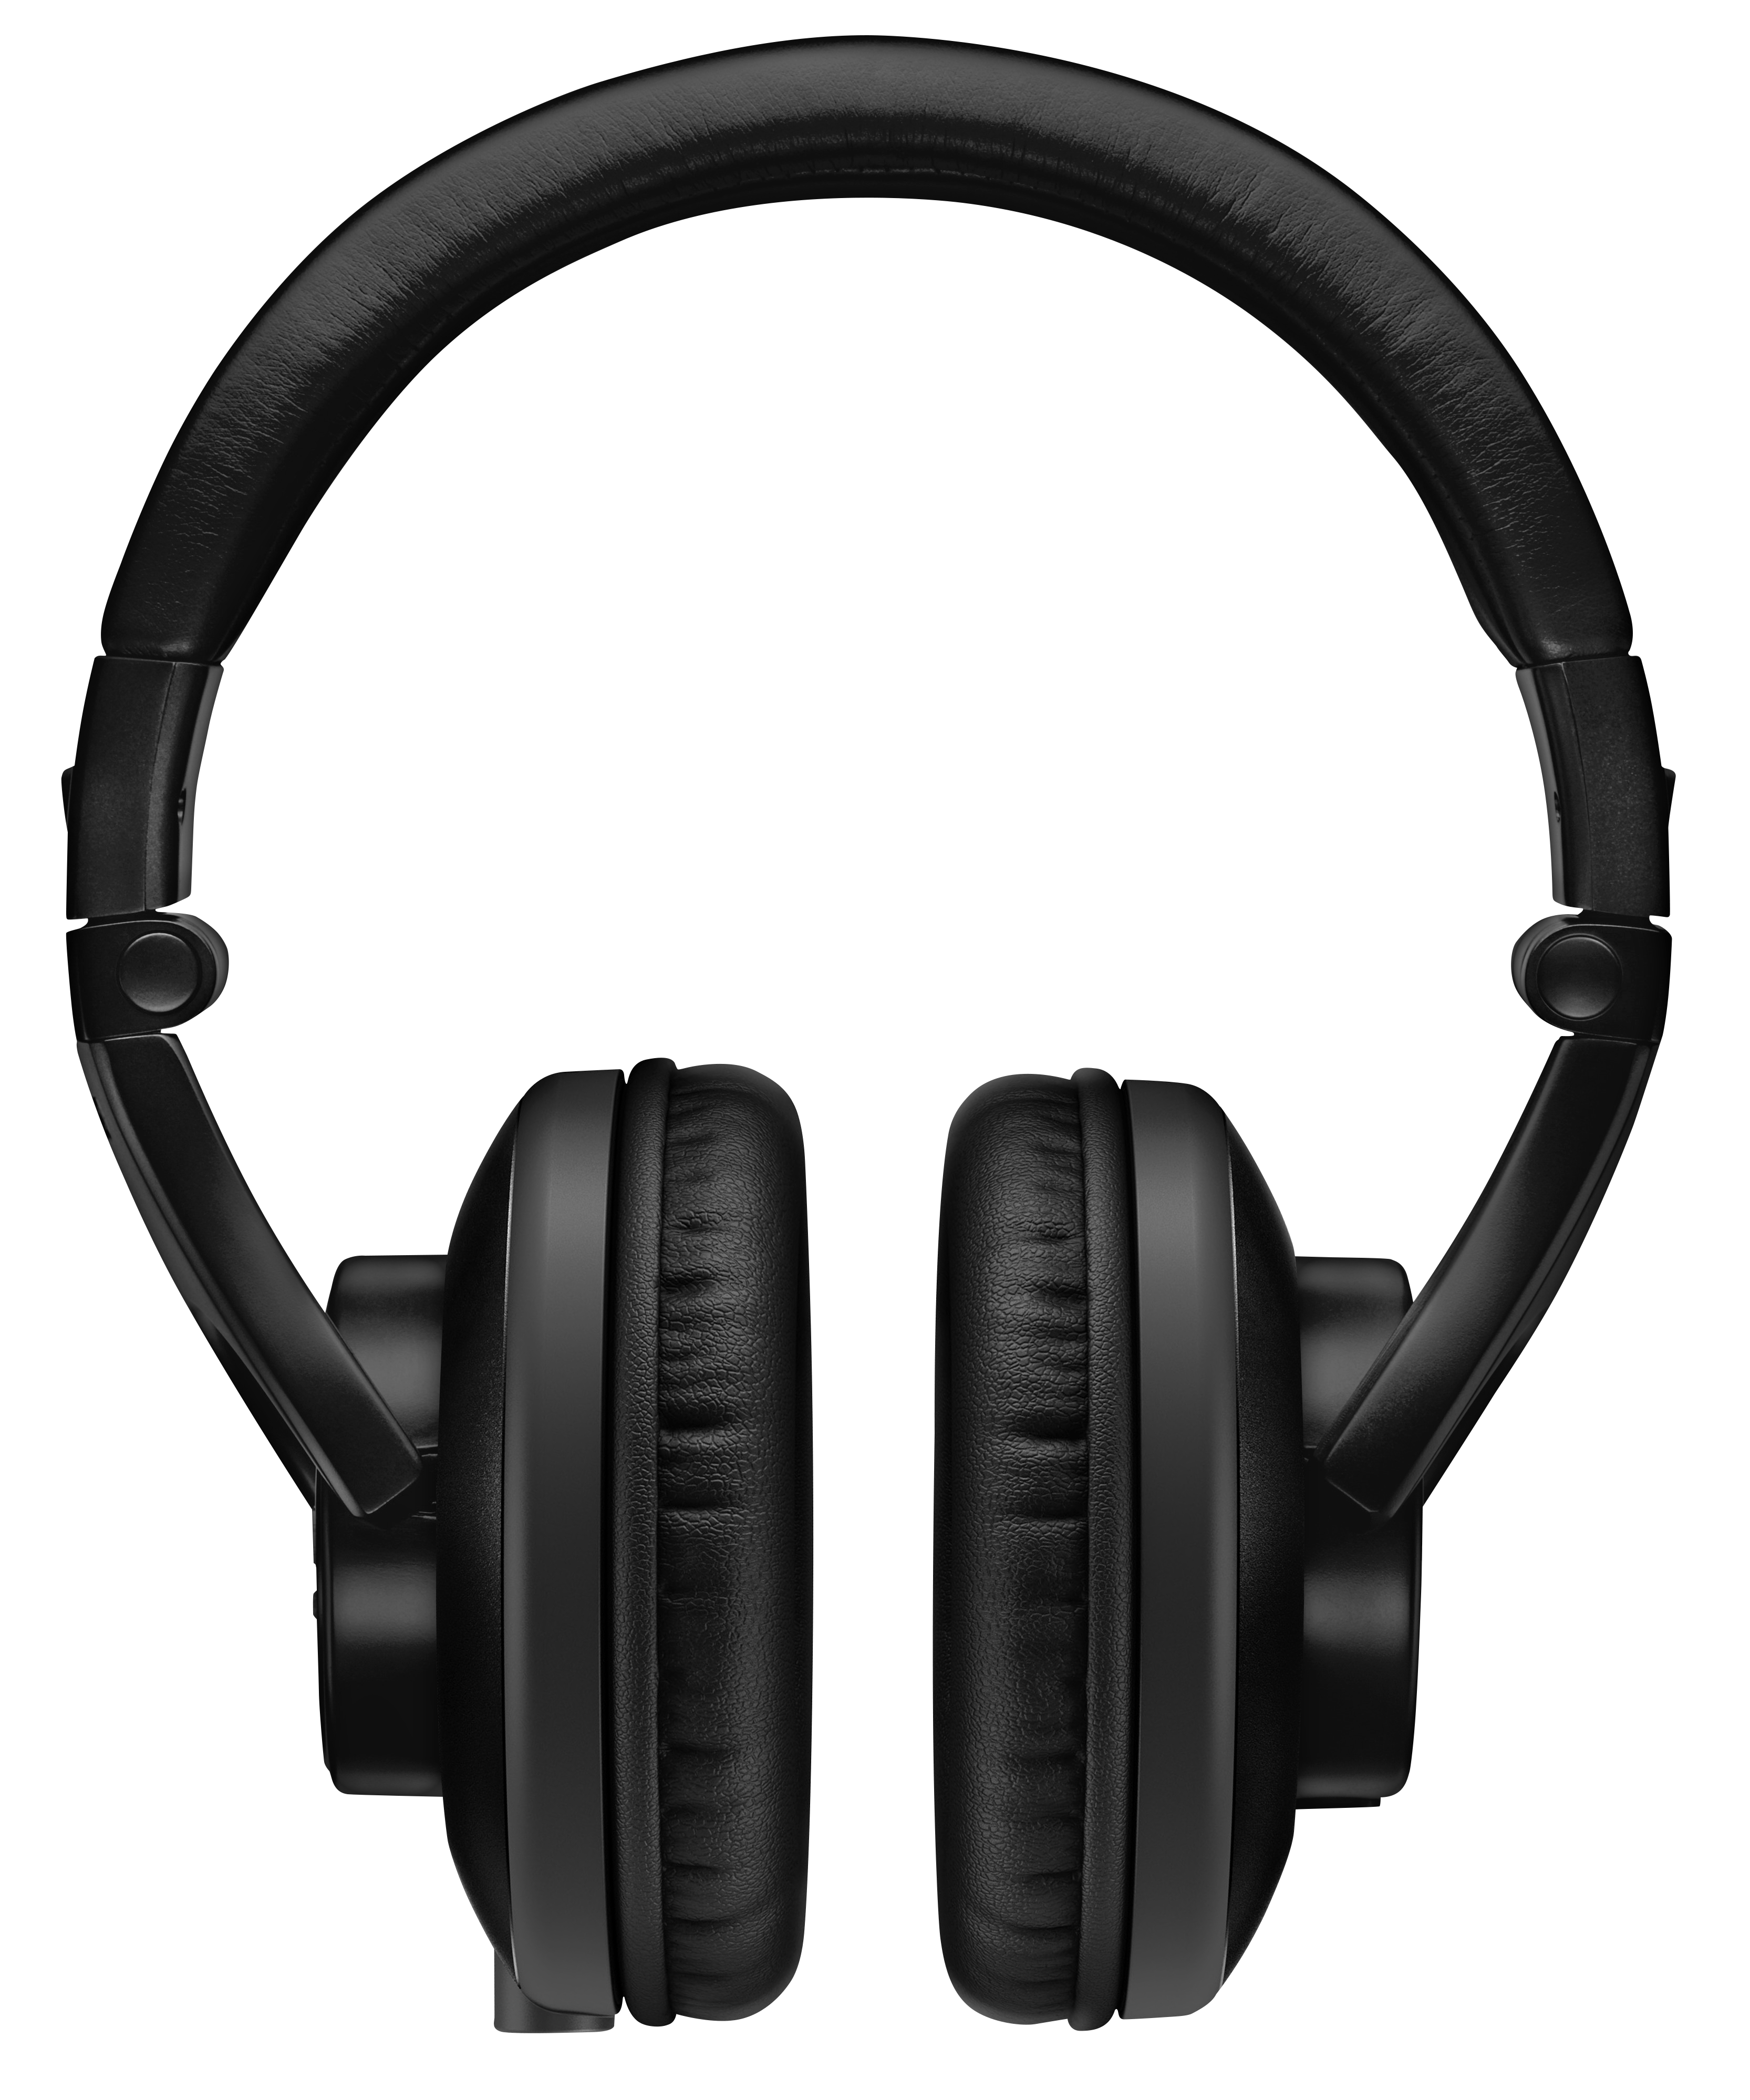 Sony Headphone PNG Background Image